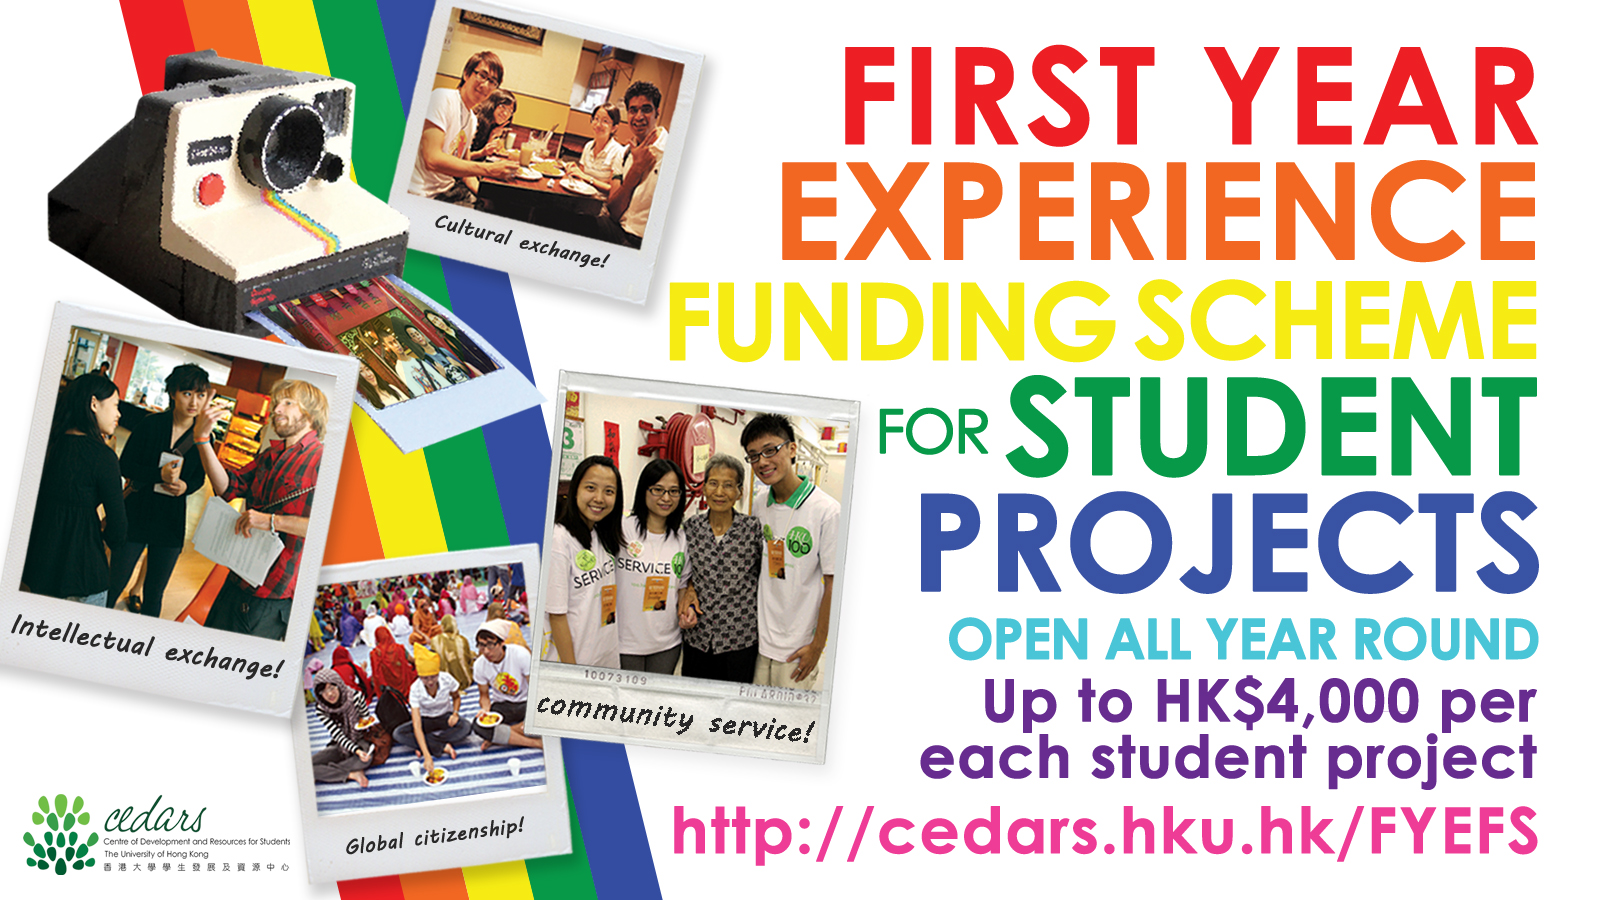 First Year Experience Funding Scheme for Student Projects